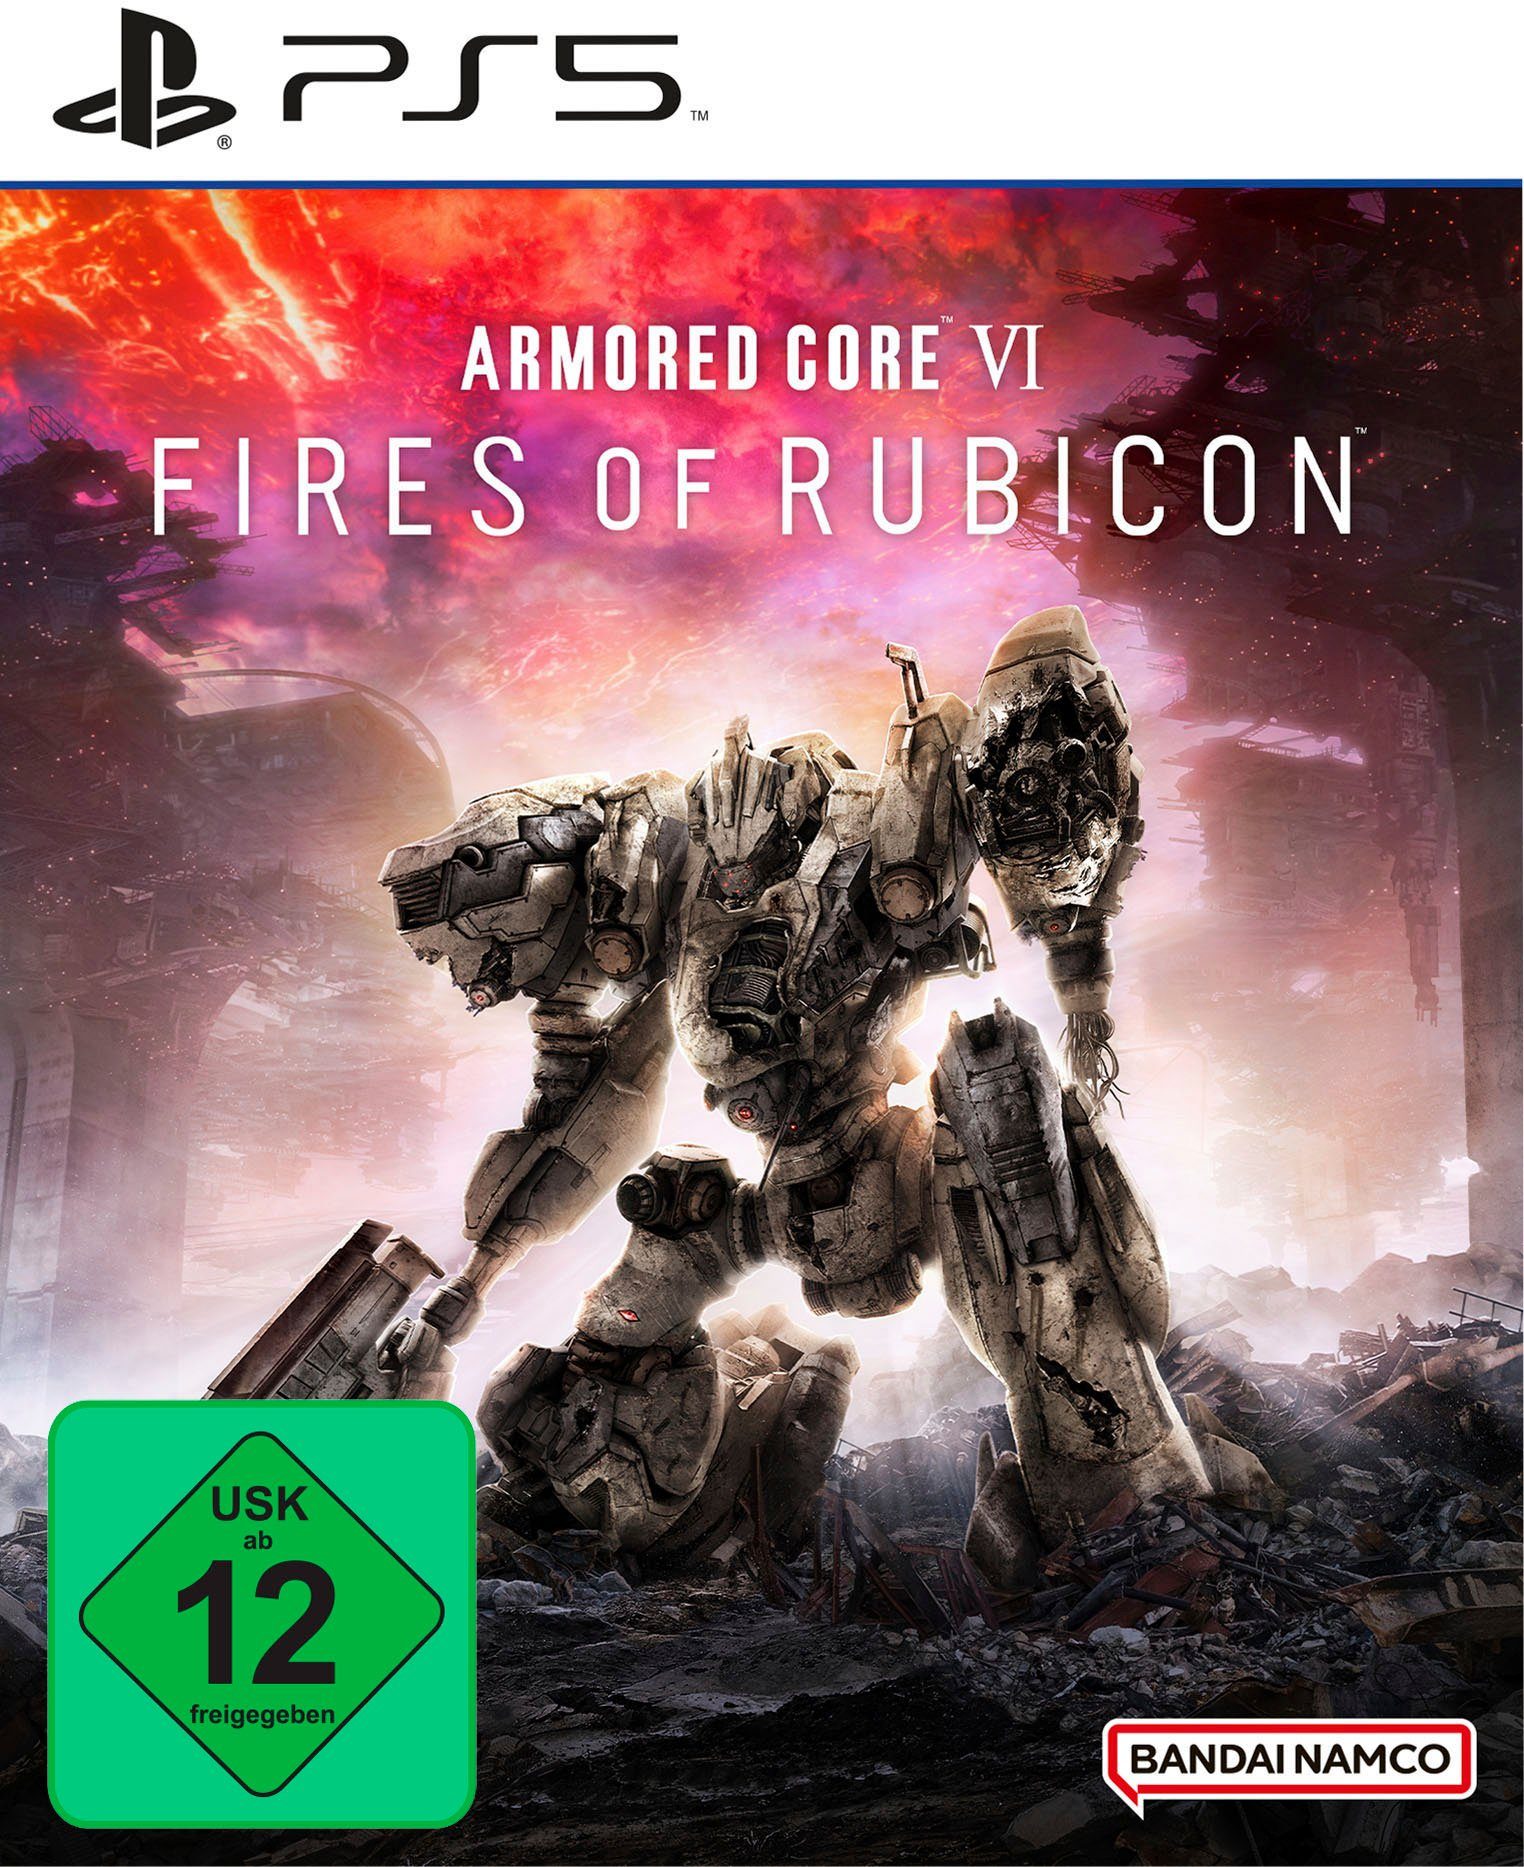 VI PlayStation Launch Fires Bandai 5 Rubicon Armored Edition of Core